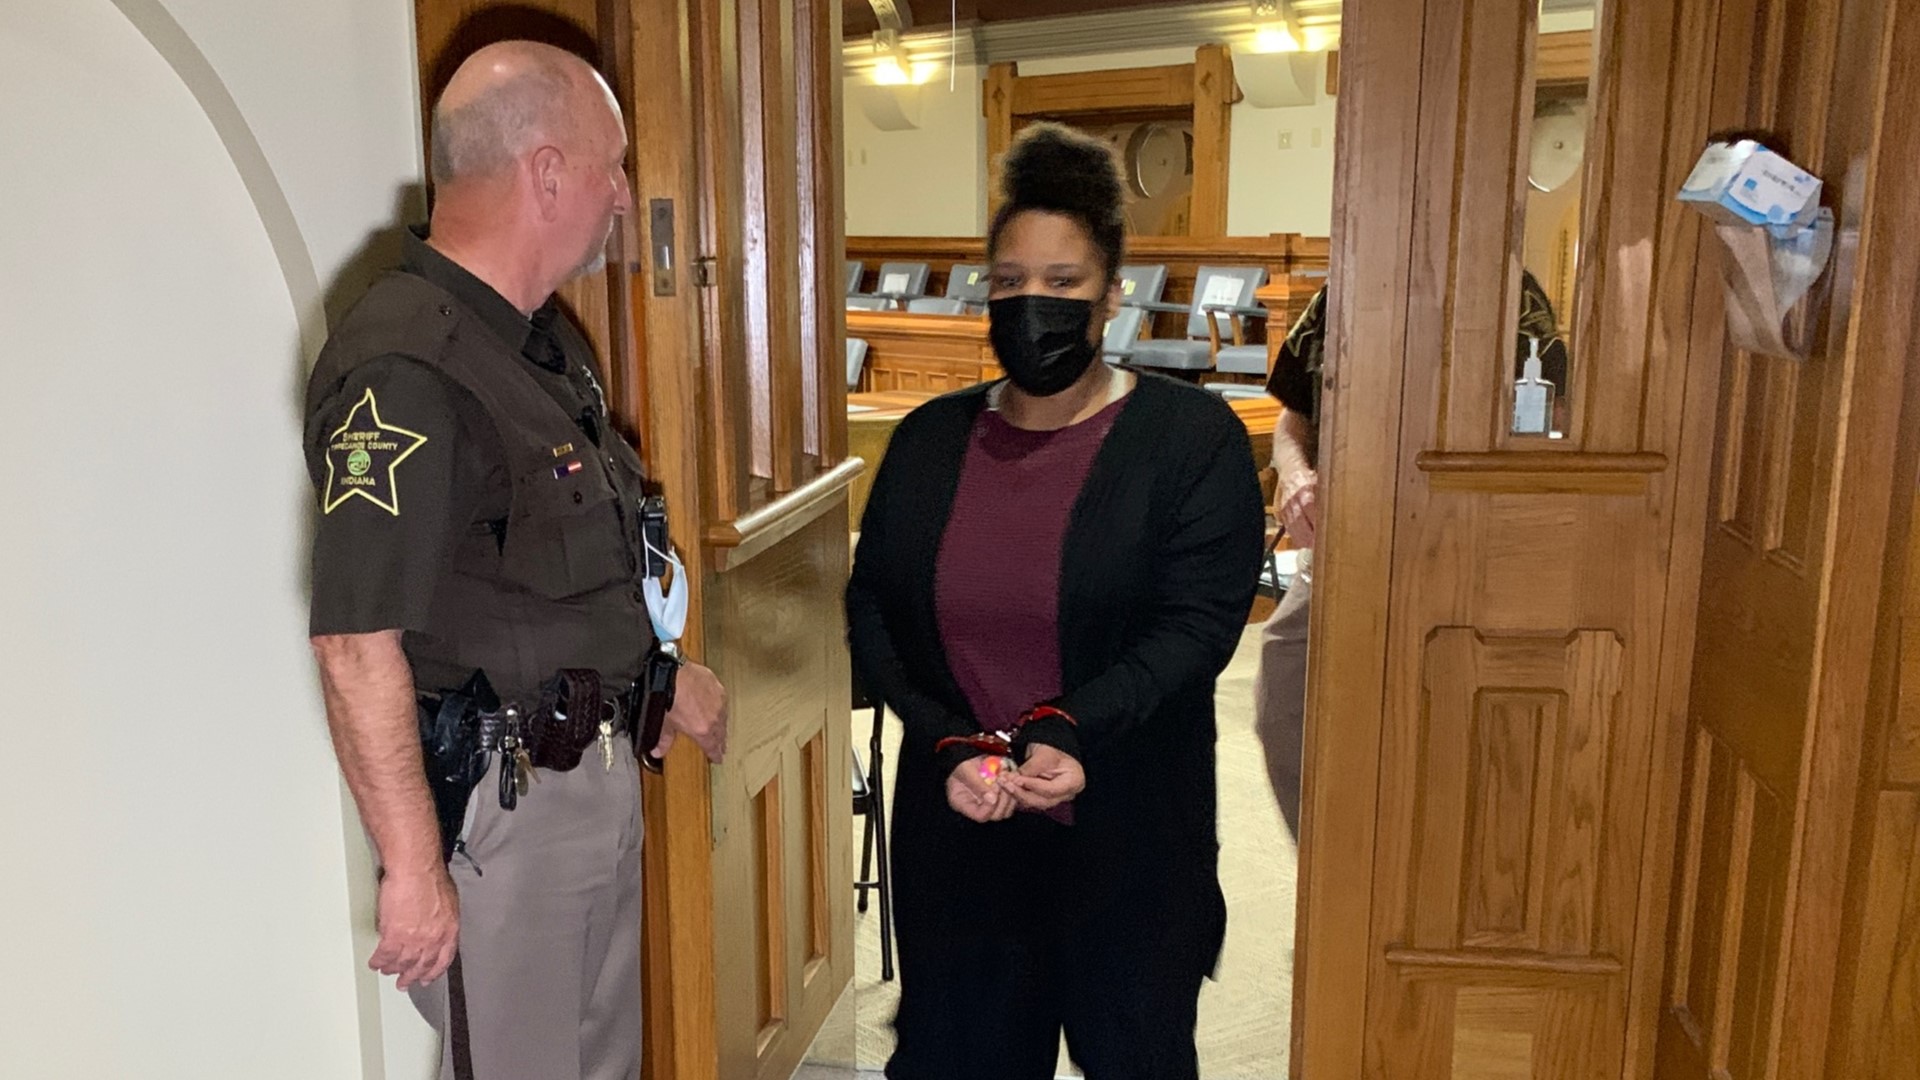 Jaelynn Billups is charged with the killing of Joshua Ungersma, 37, and with murder in the death of her alleged accomplice, 19-year-old Alberto Vanmeter.